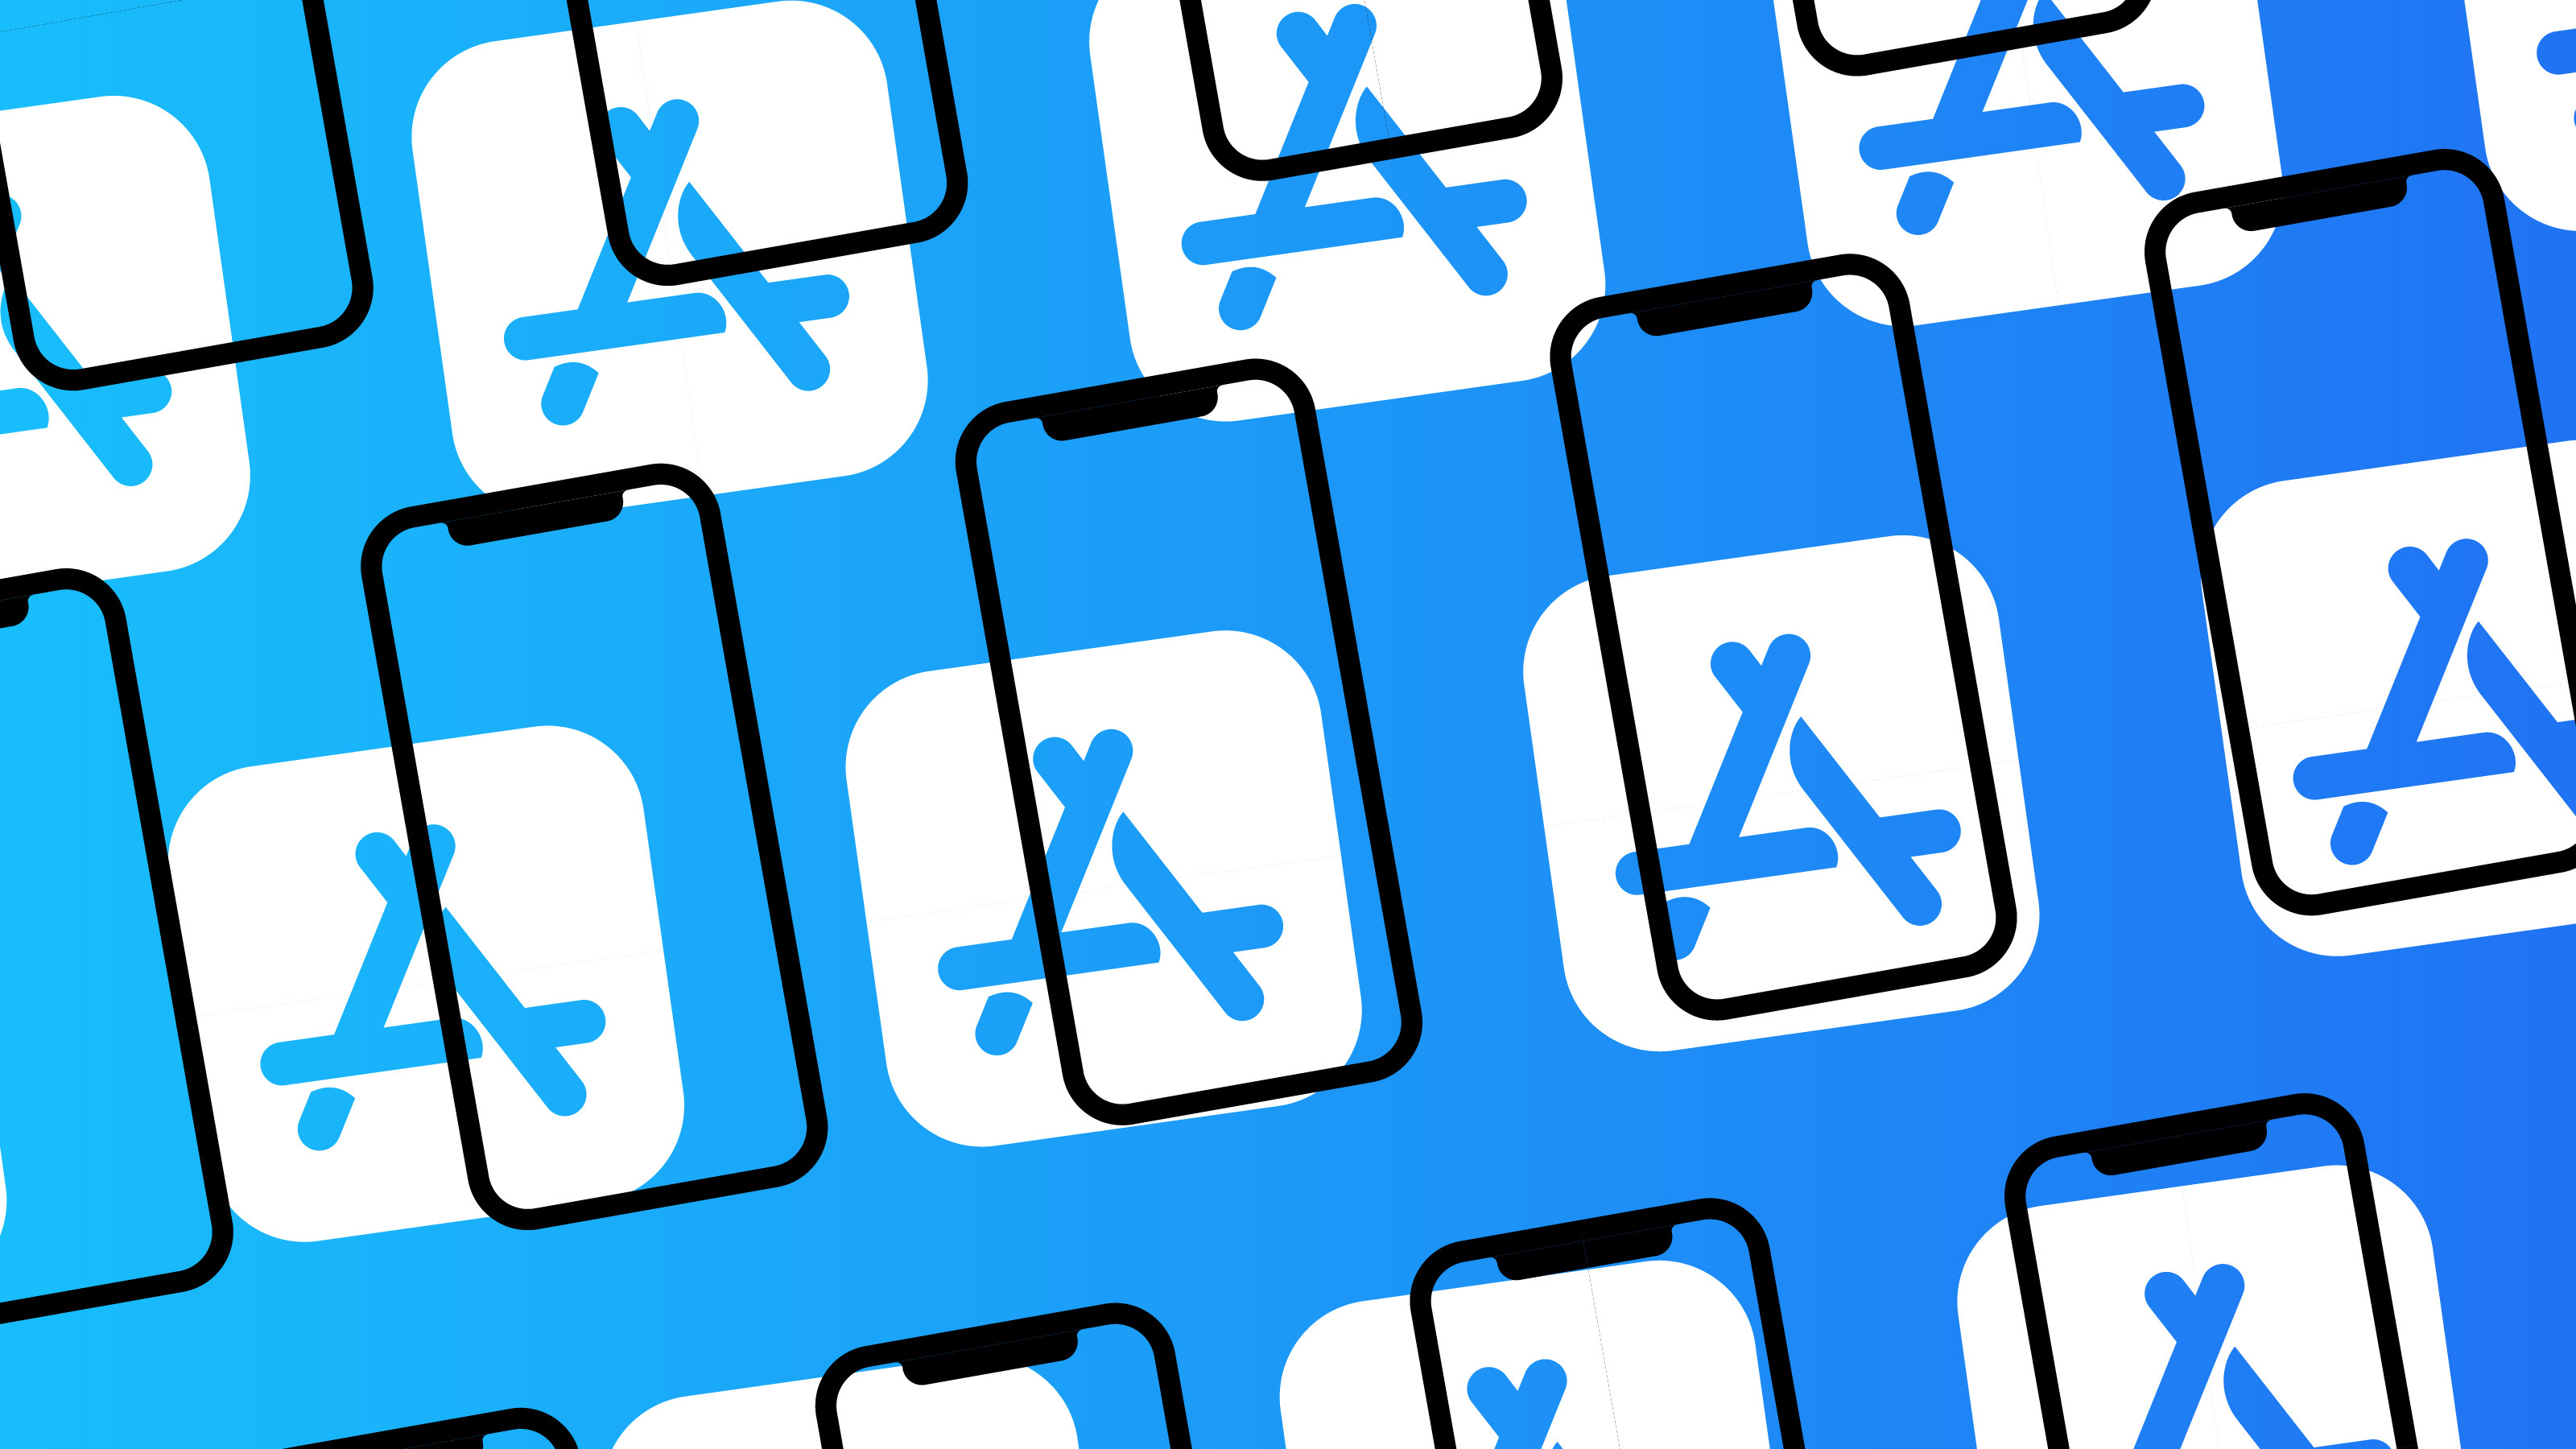 Apple's App Store facilitated $643 billion in commerce, up 24% from last  year | TechCrunch